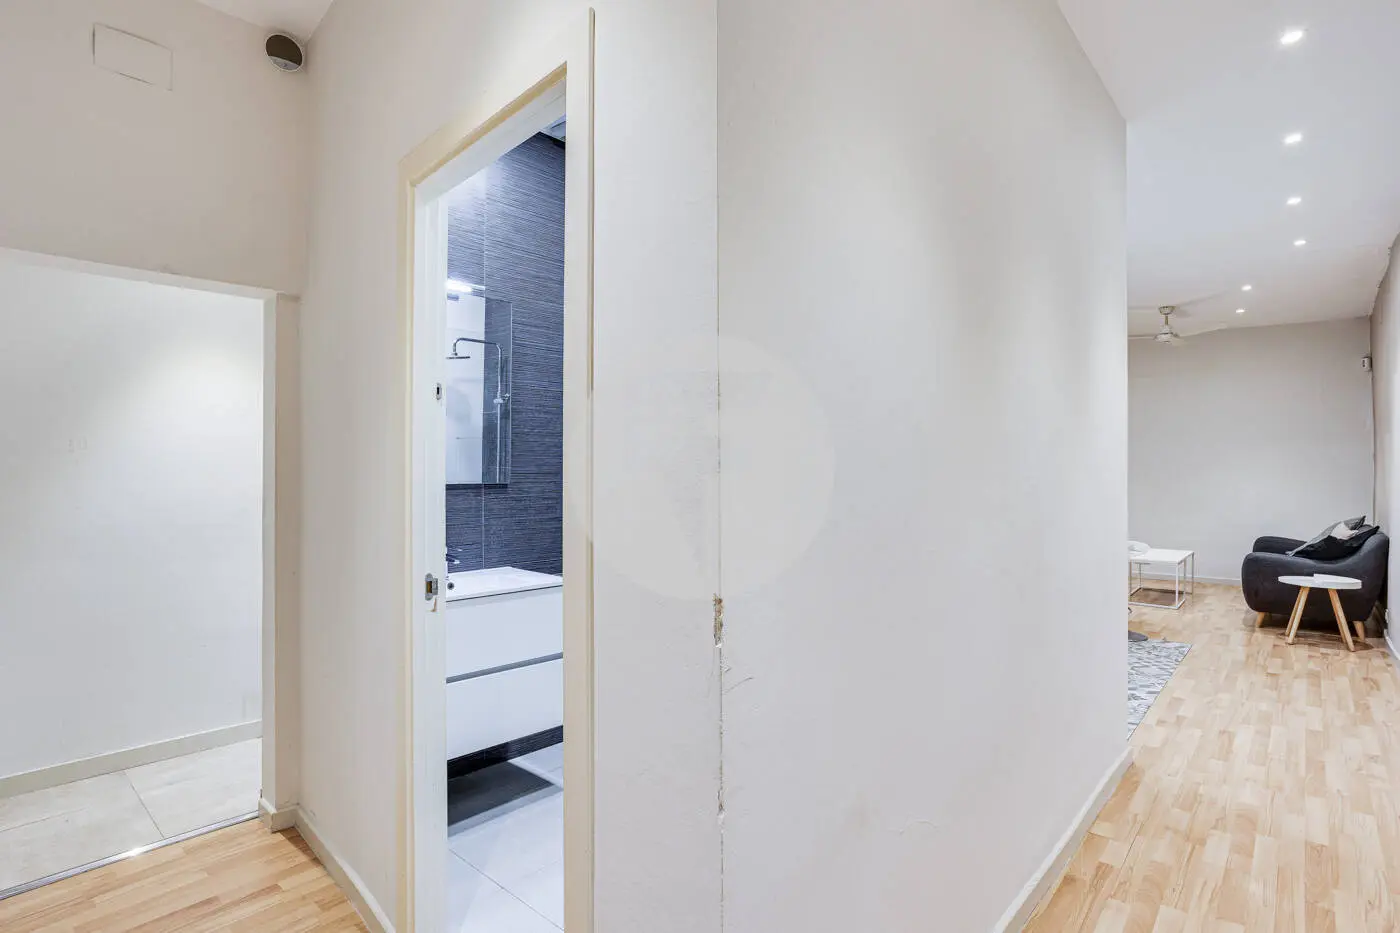 Magnificent apartment for sale next to Pl Universitat of 114m2 according to the land registry, located on Tallers Street in the Ciutat Vella neighborhood of Barcelona 22